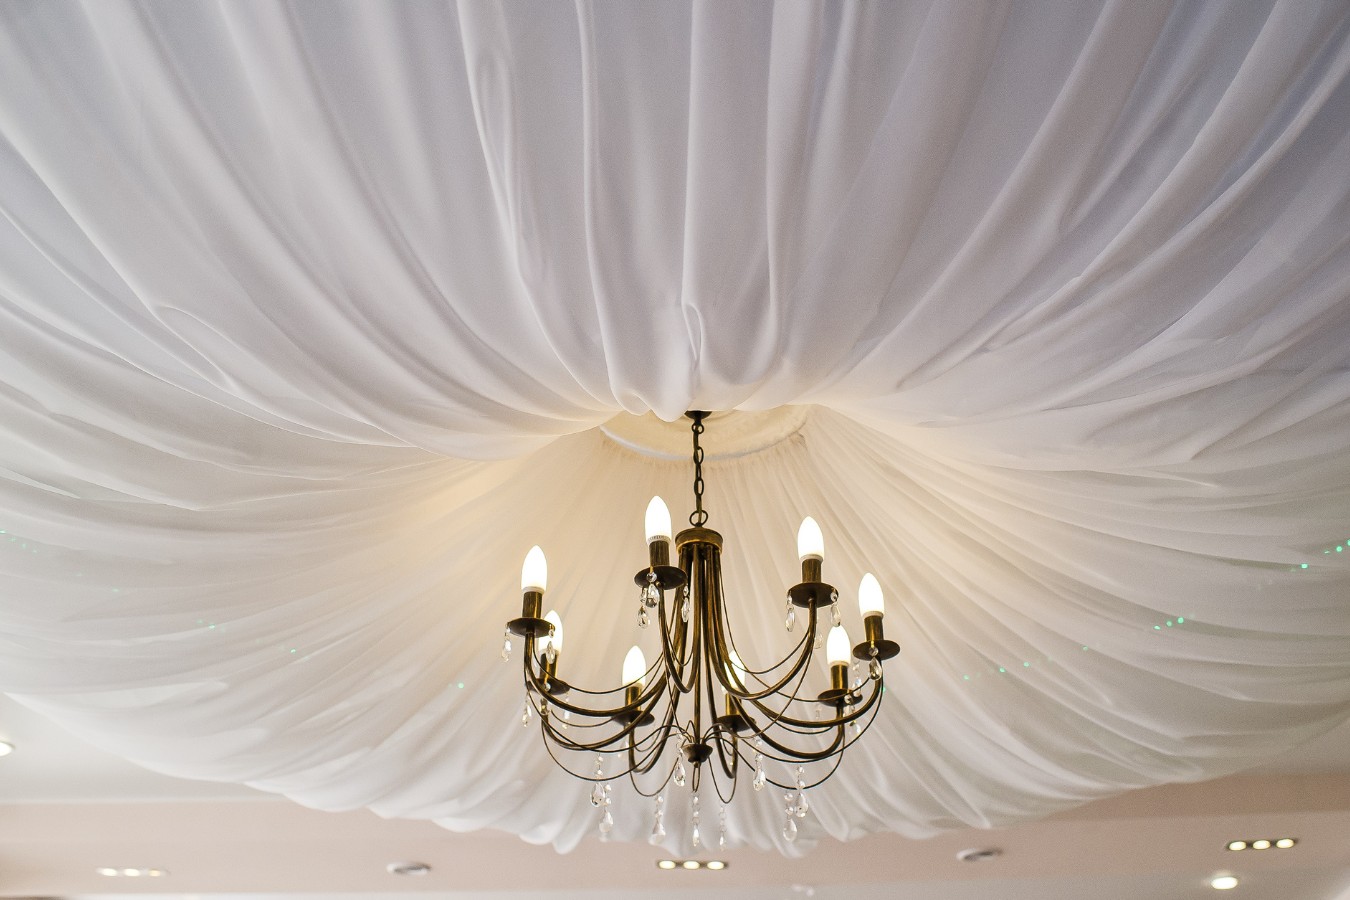 Wedding Tent Drapes (Part I): Everything You Need to Know About Tent Drapes